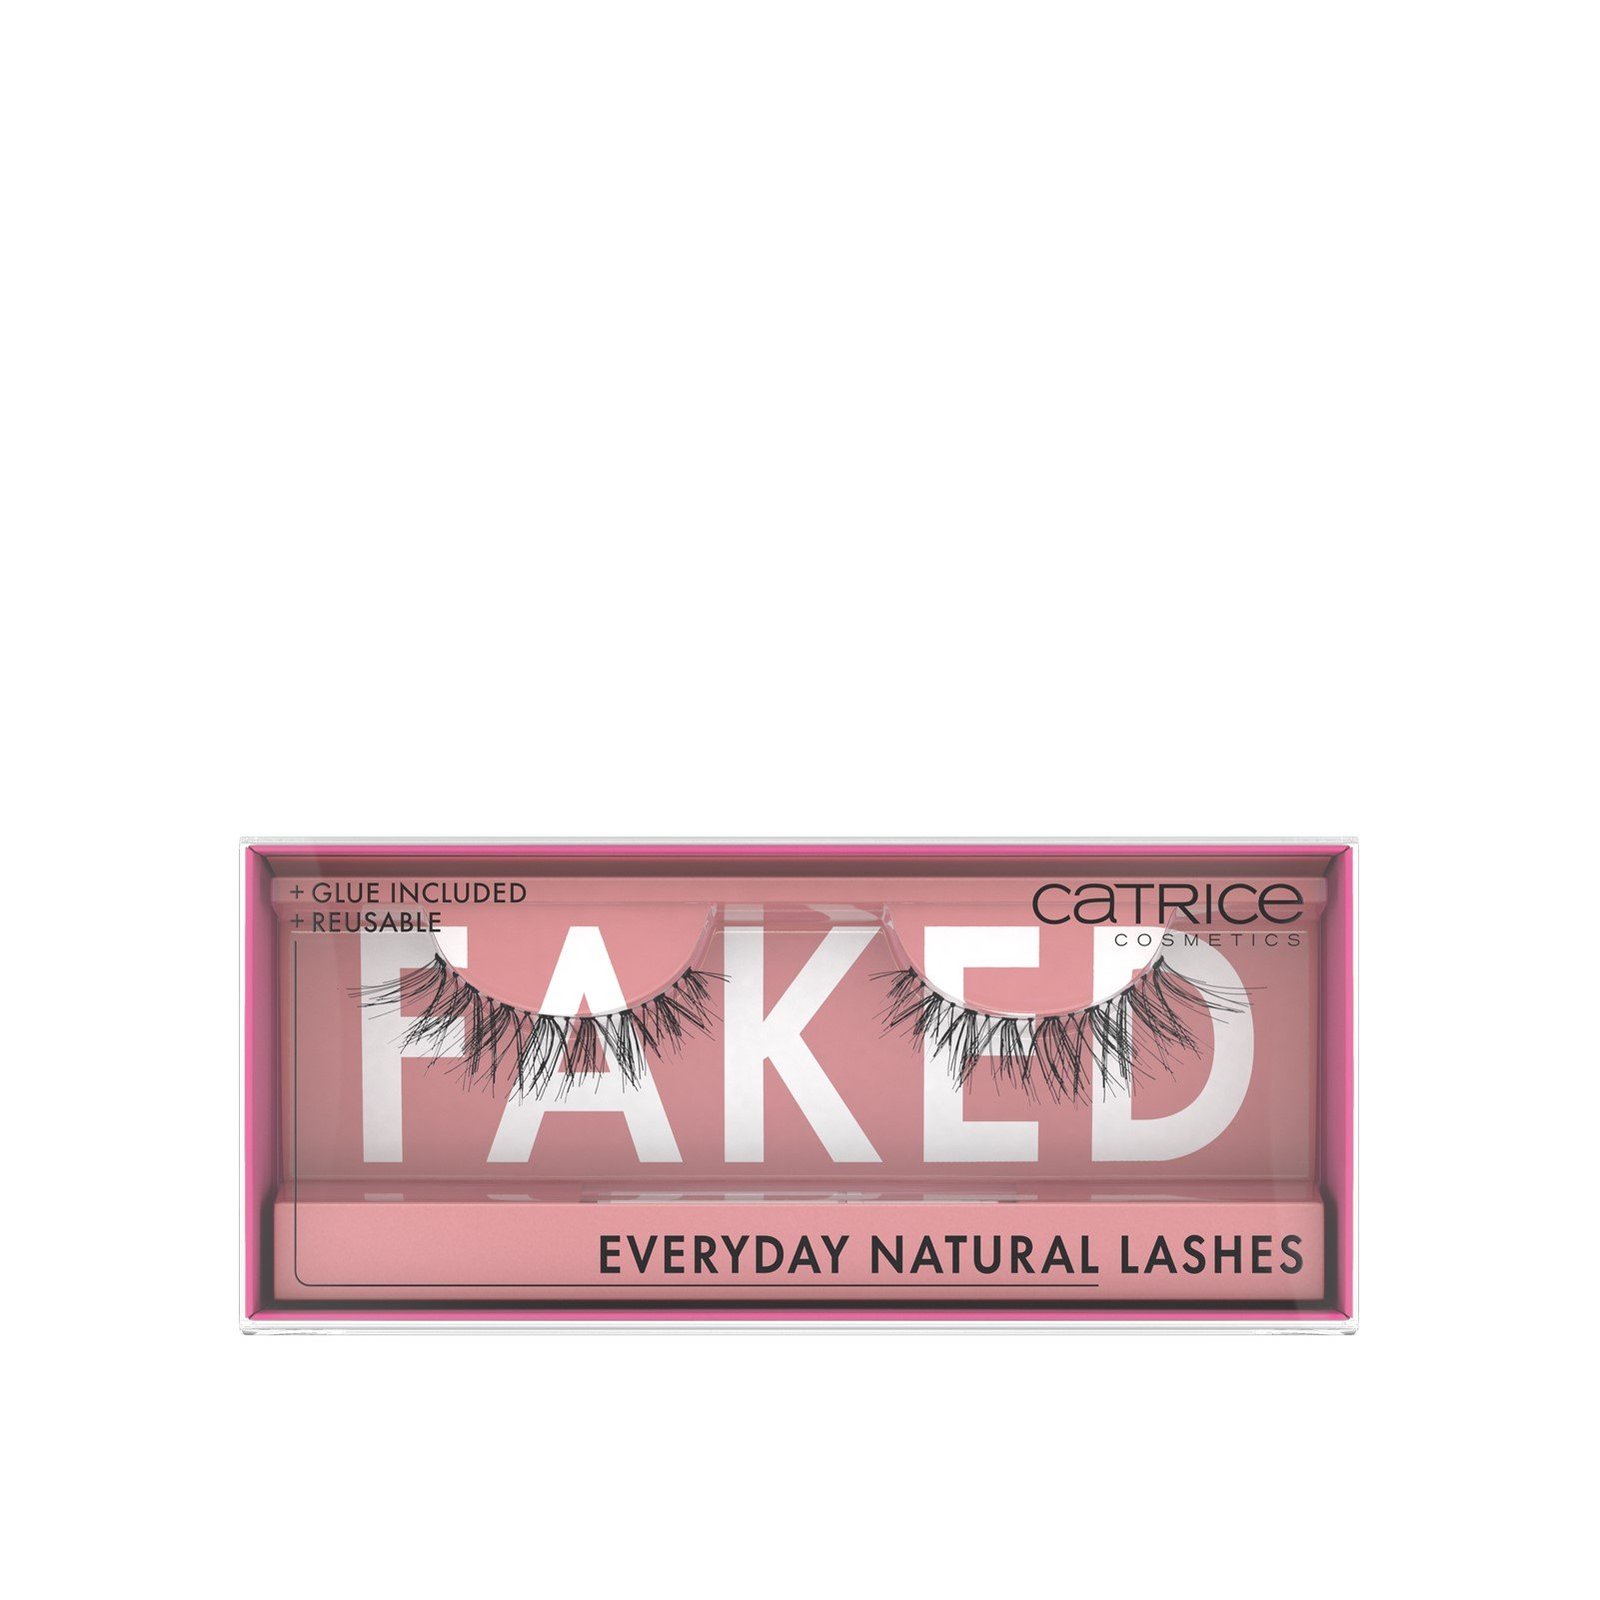 Catrice Faked Everyday Natural Lashes x1 Pair